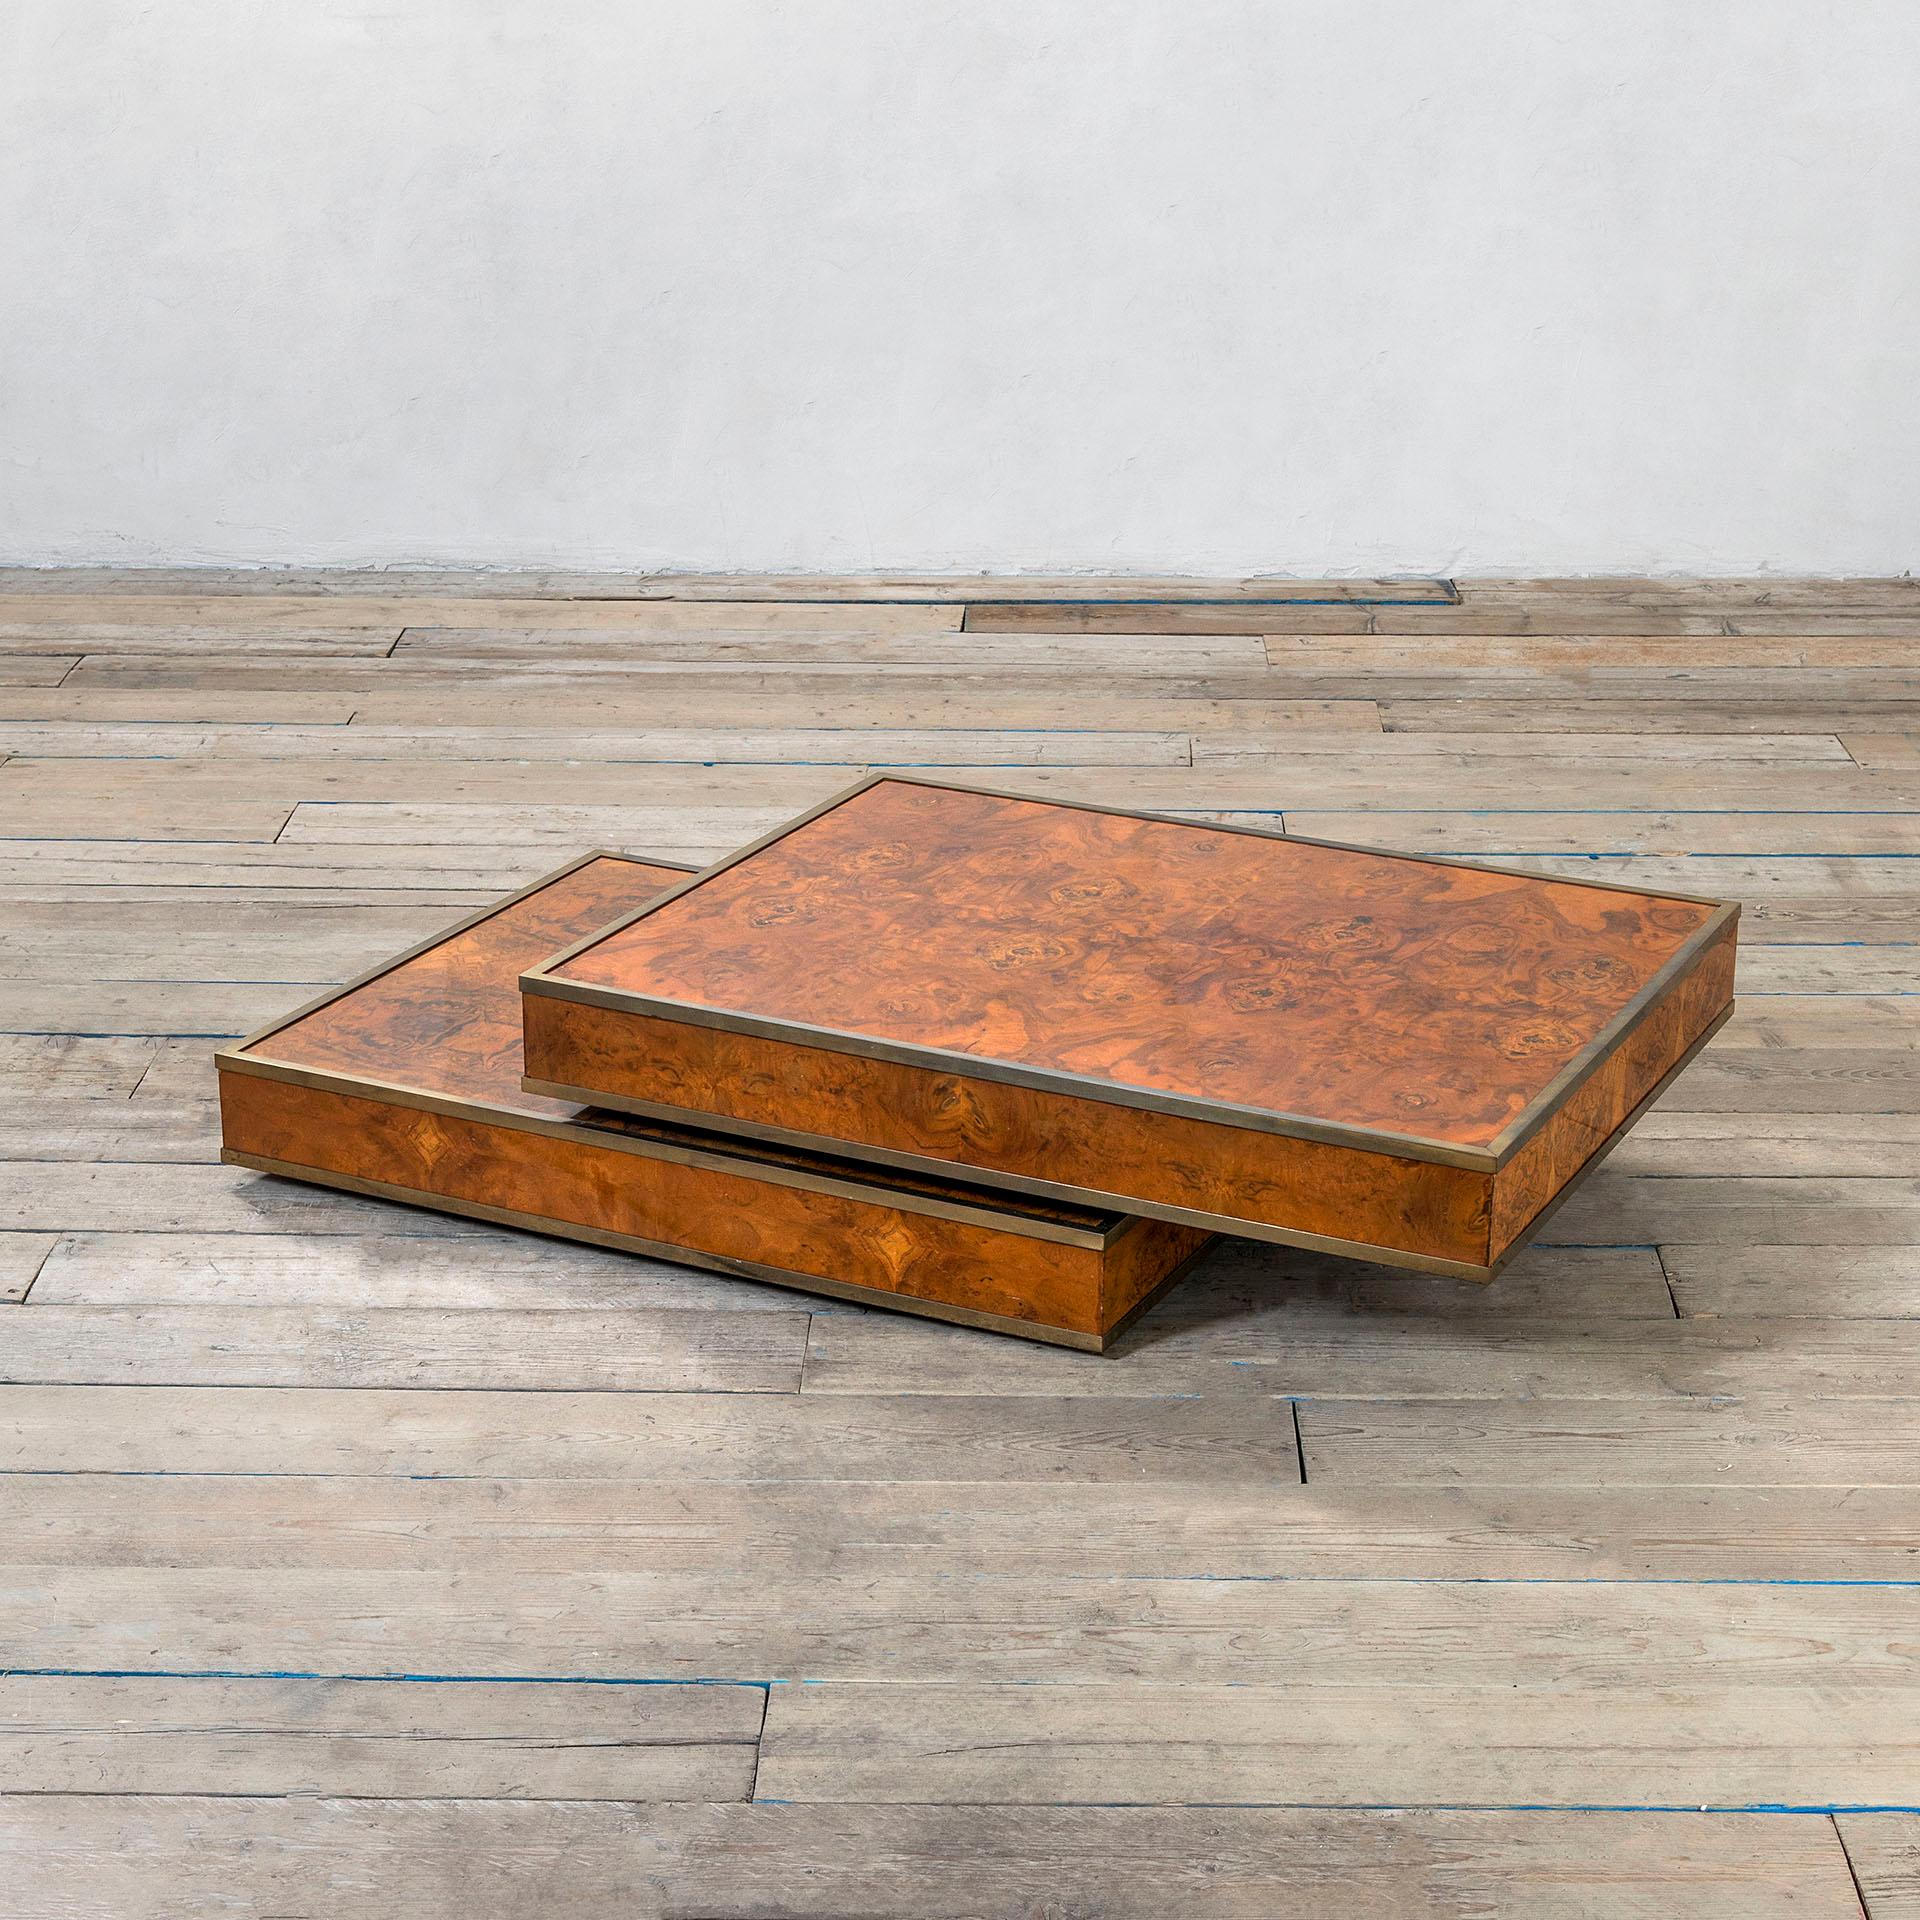 Coffee or centre table. The table was produced in '80s, it has a wooden structure, covered by walnut burl and with corners covered by brass. Thet table could slide and trasnform into a double top table. 
The dimensions as closed are:
34 x 120 x 91